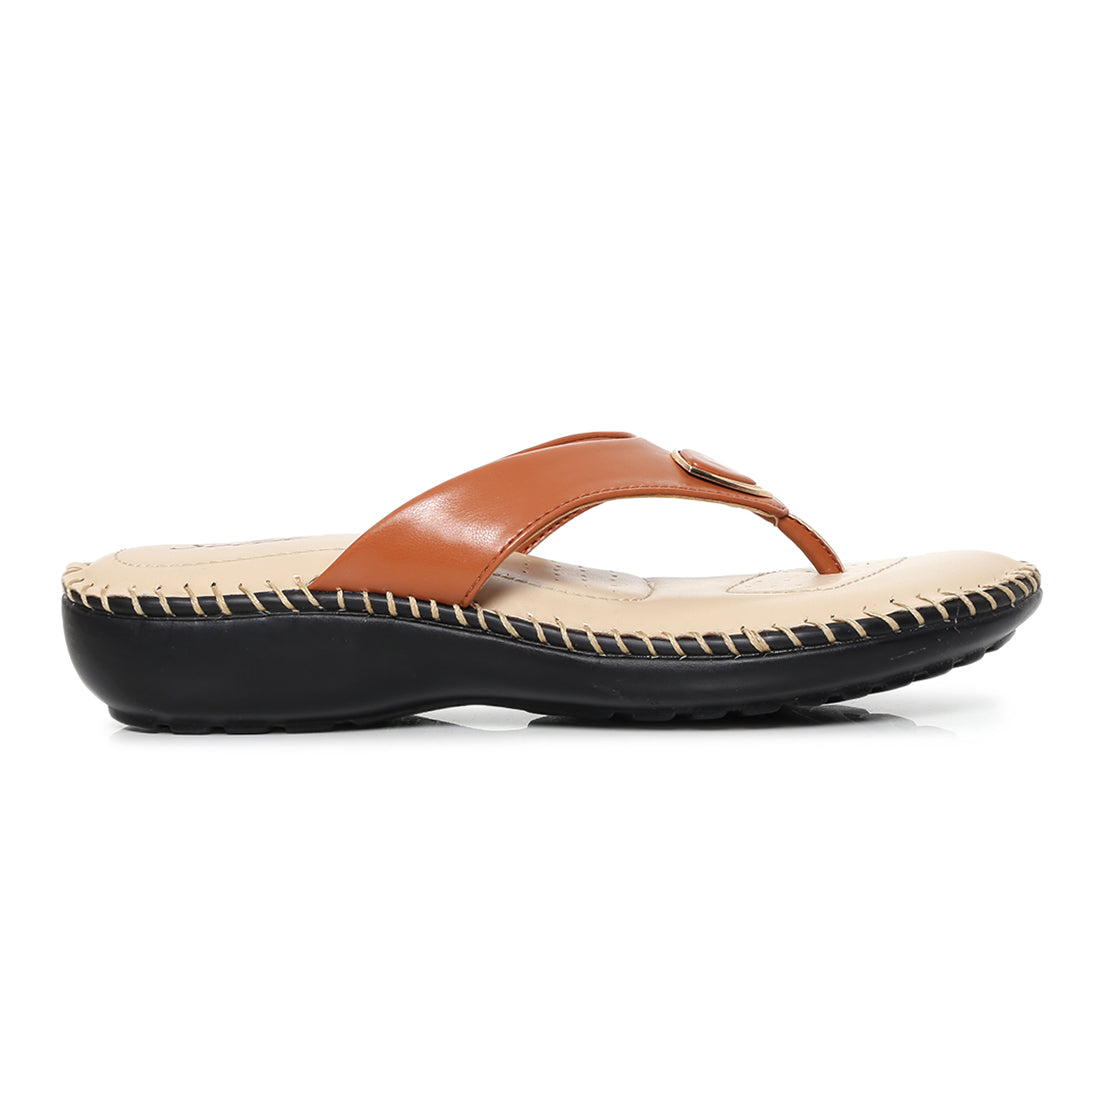 Paragon  K6014L Women Sandals | Casual &amp; Formal Sandals | Stylish, Comfortable &amp; Durable | For Daily &amp; Occasion Wear